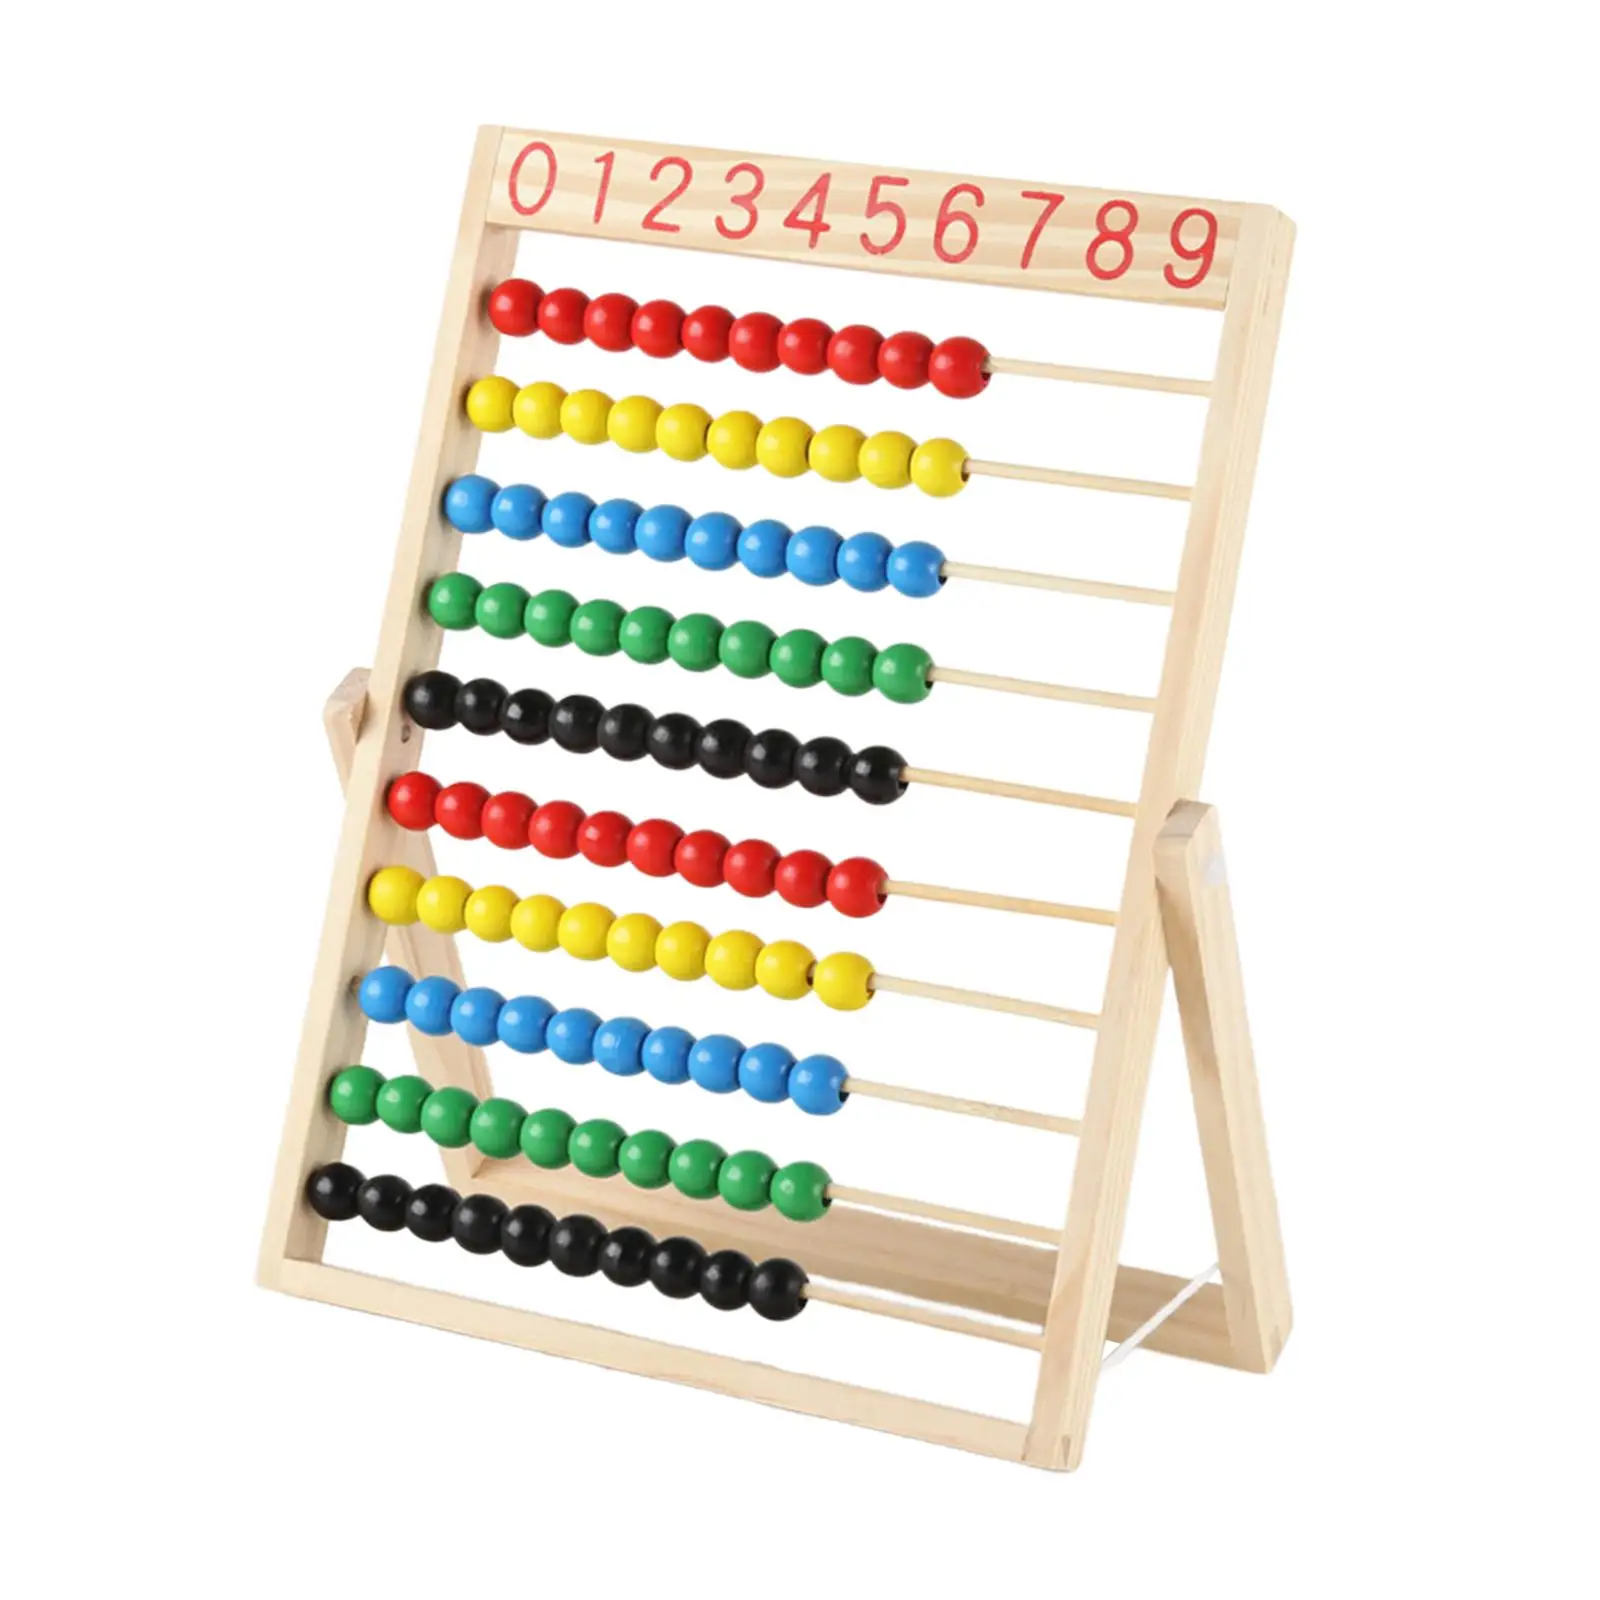 Add Subtract Abacus Math Games Learn Math Counting Abacus Toy Ten Frame Set for Kindergarten Toddlers Boys Girls Preschool Kids